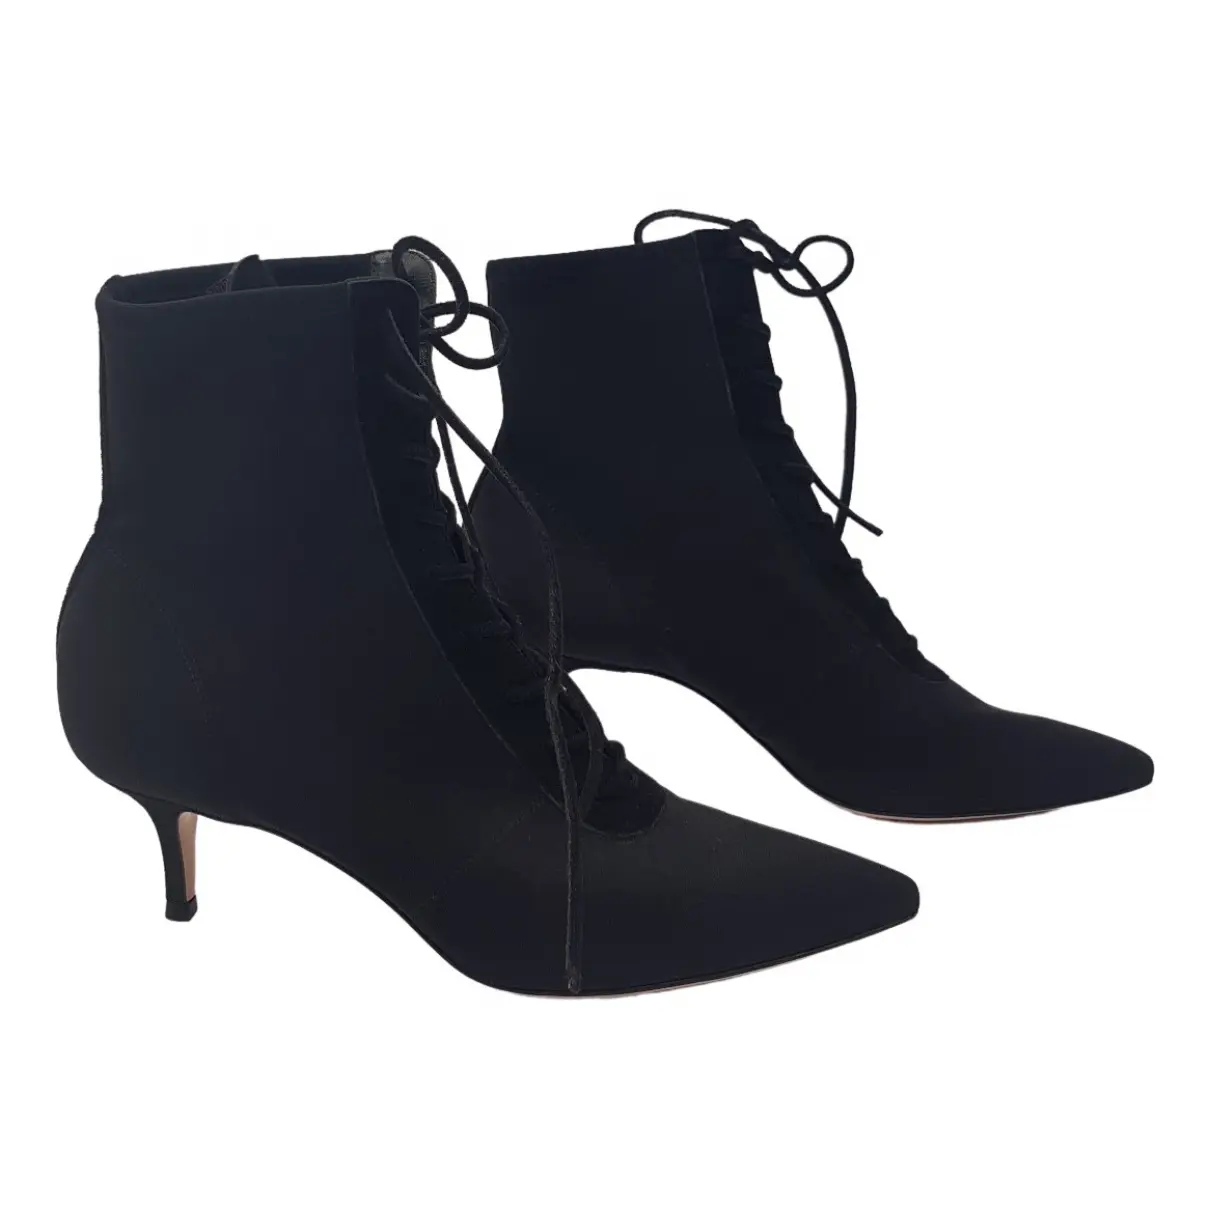 Cloth lace up boots Gianvito Rossi